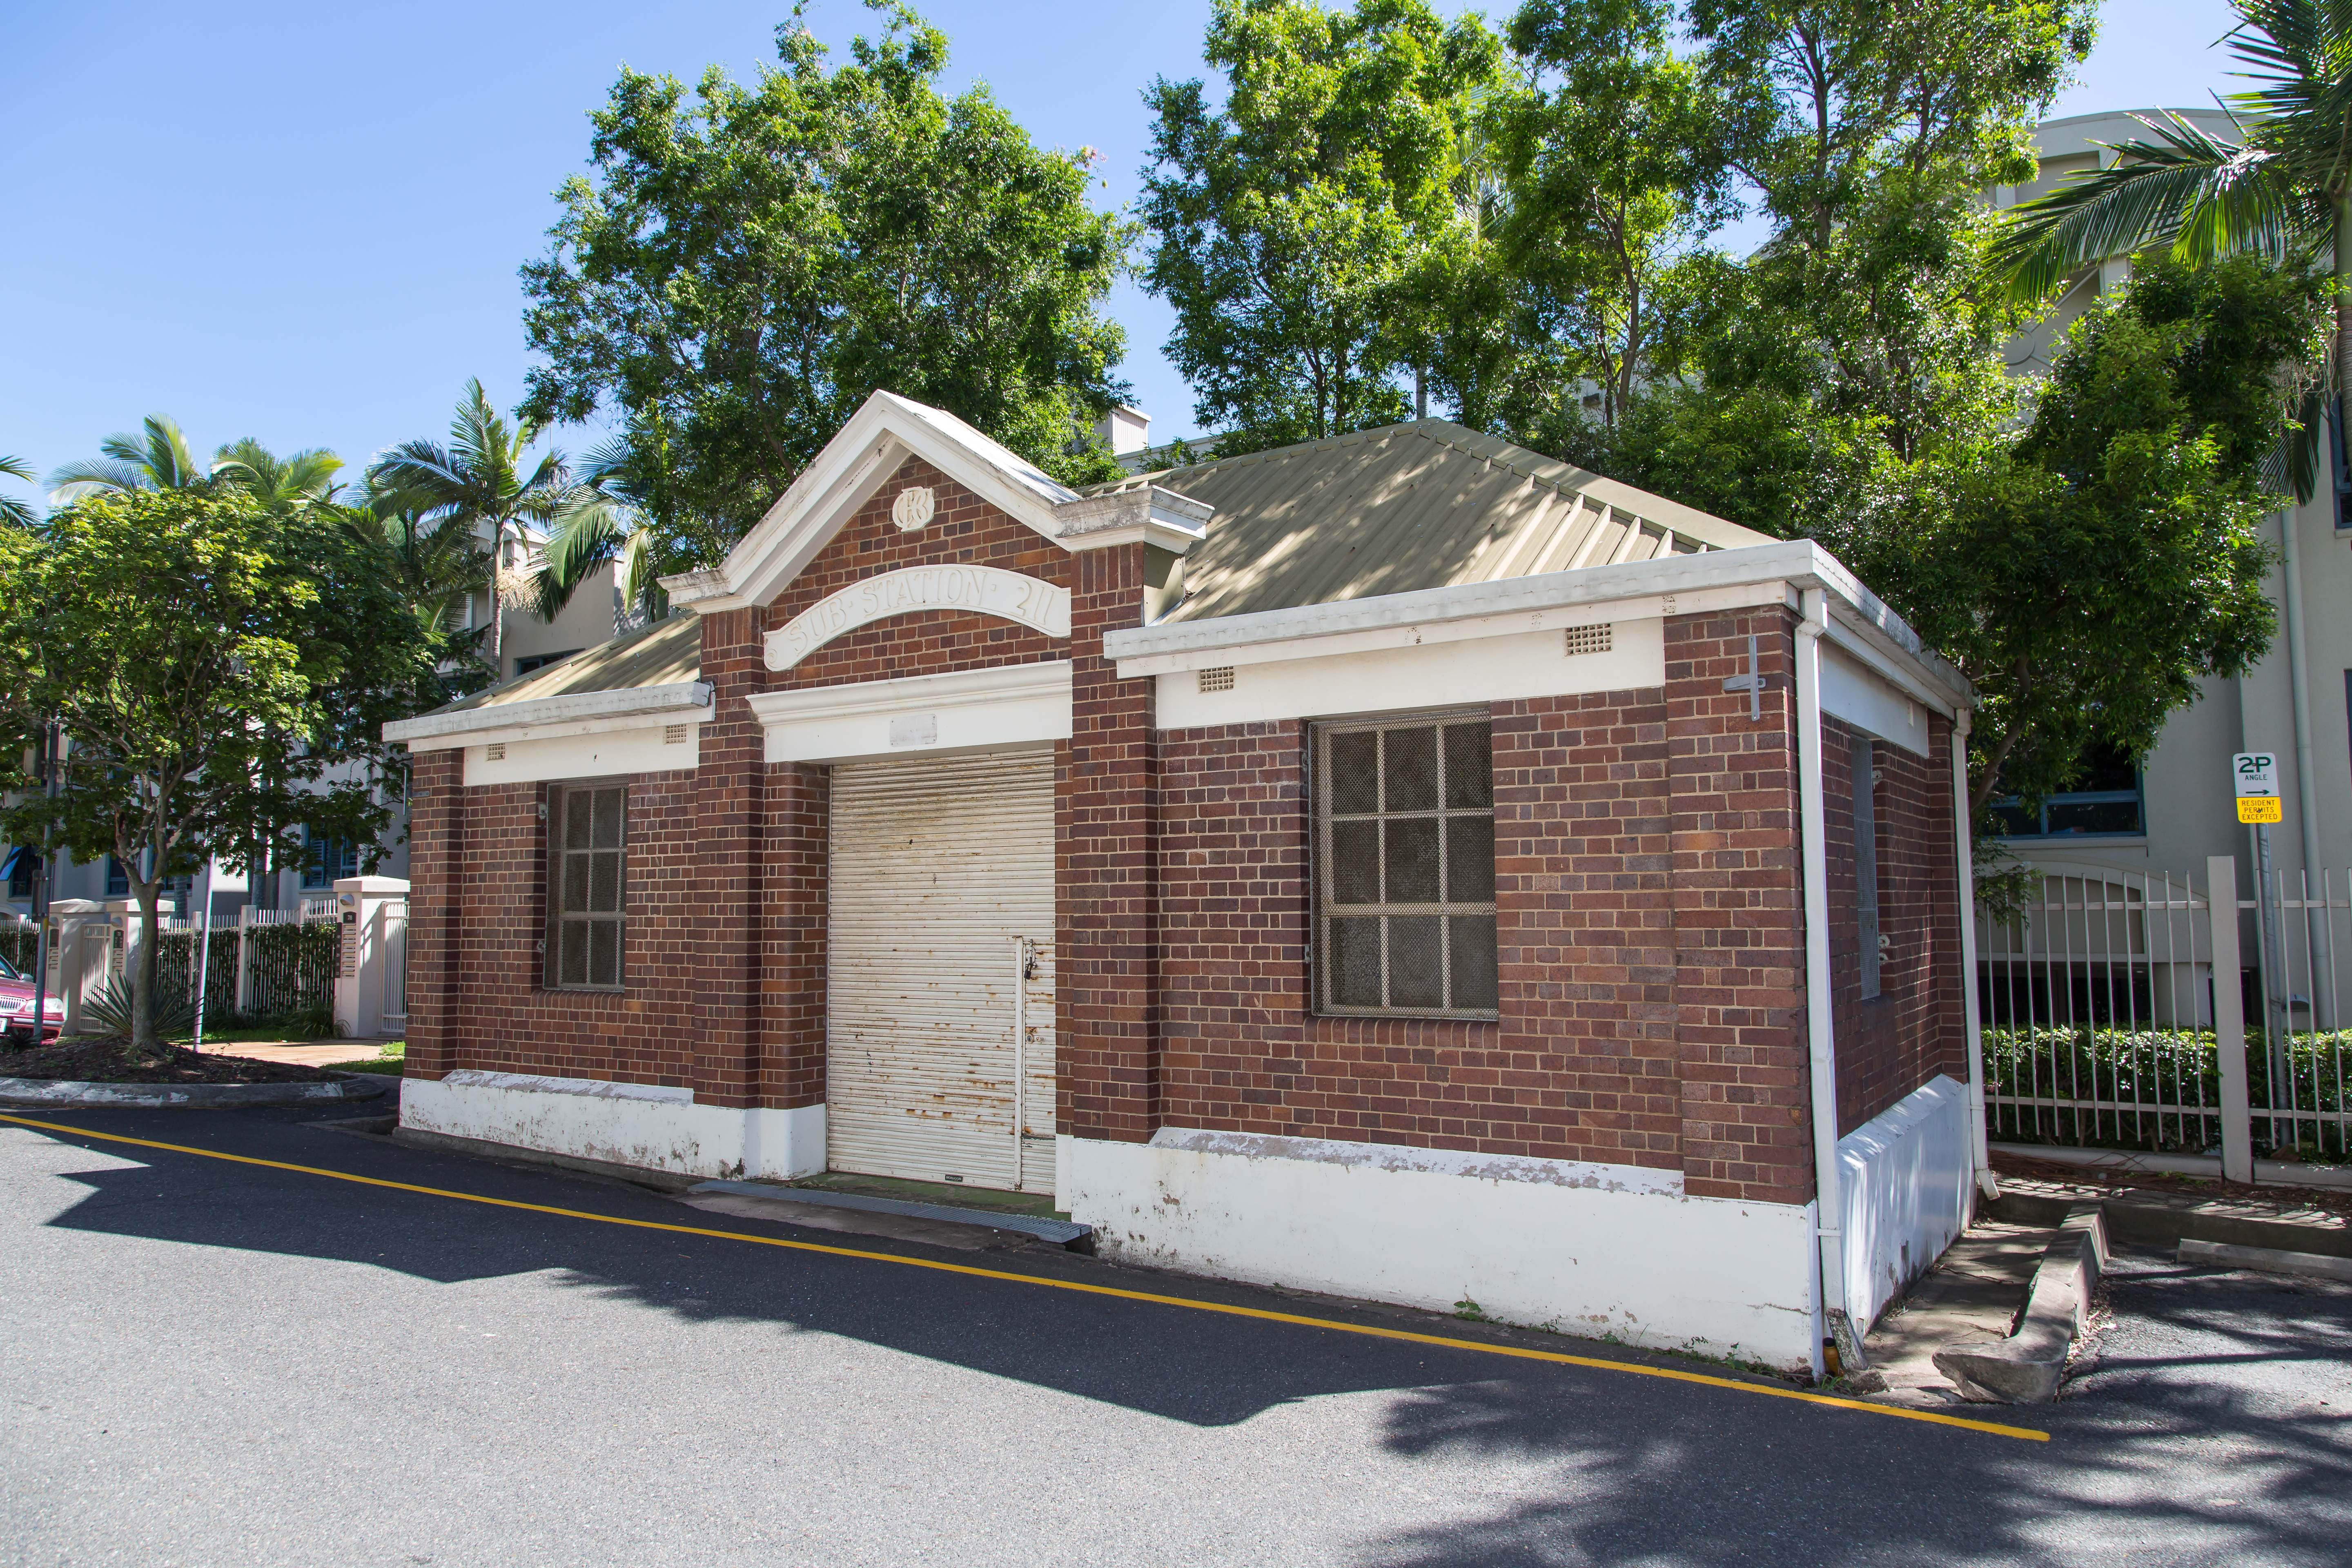 This is an image of the front of the heritage place known as Cairns Street Substation 211